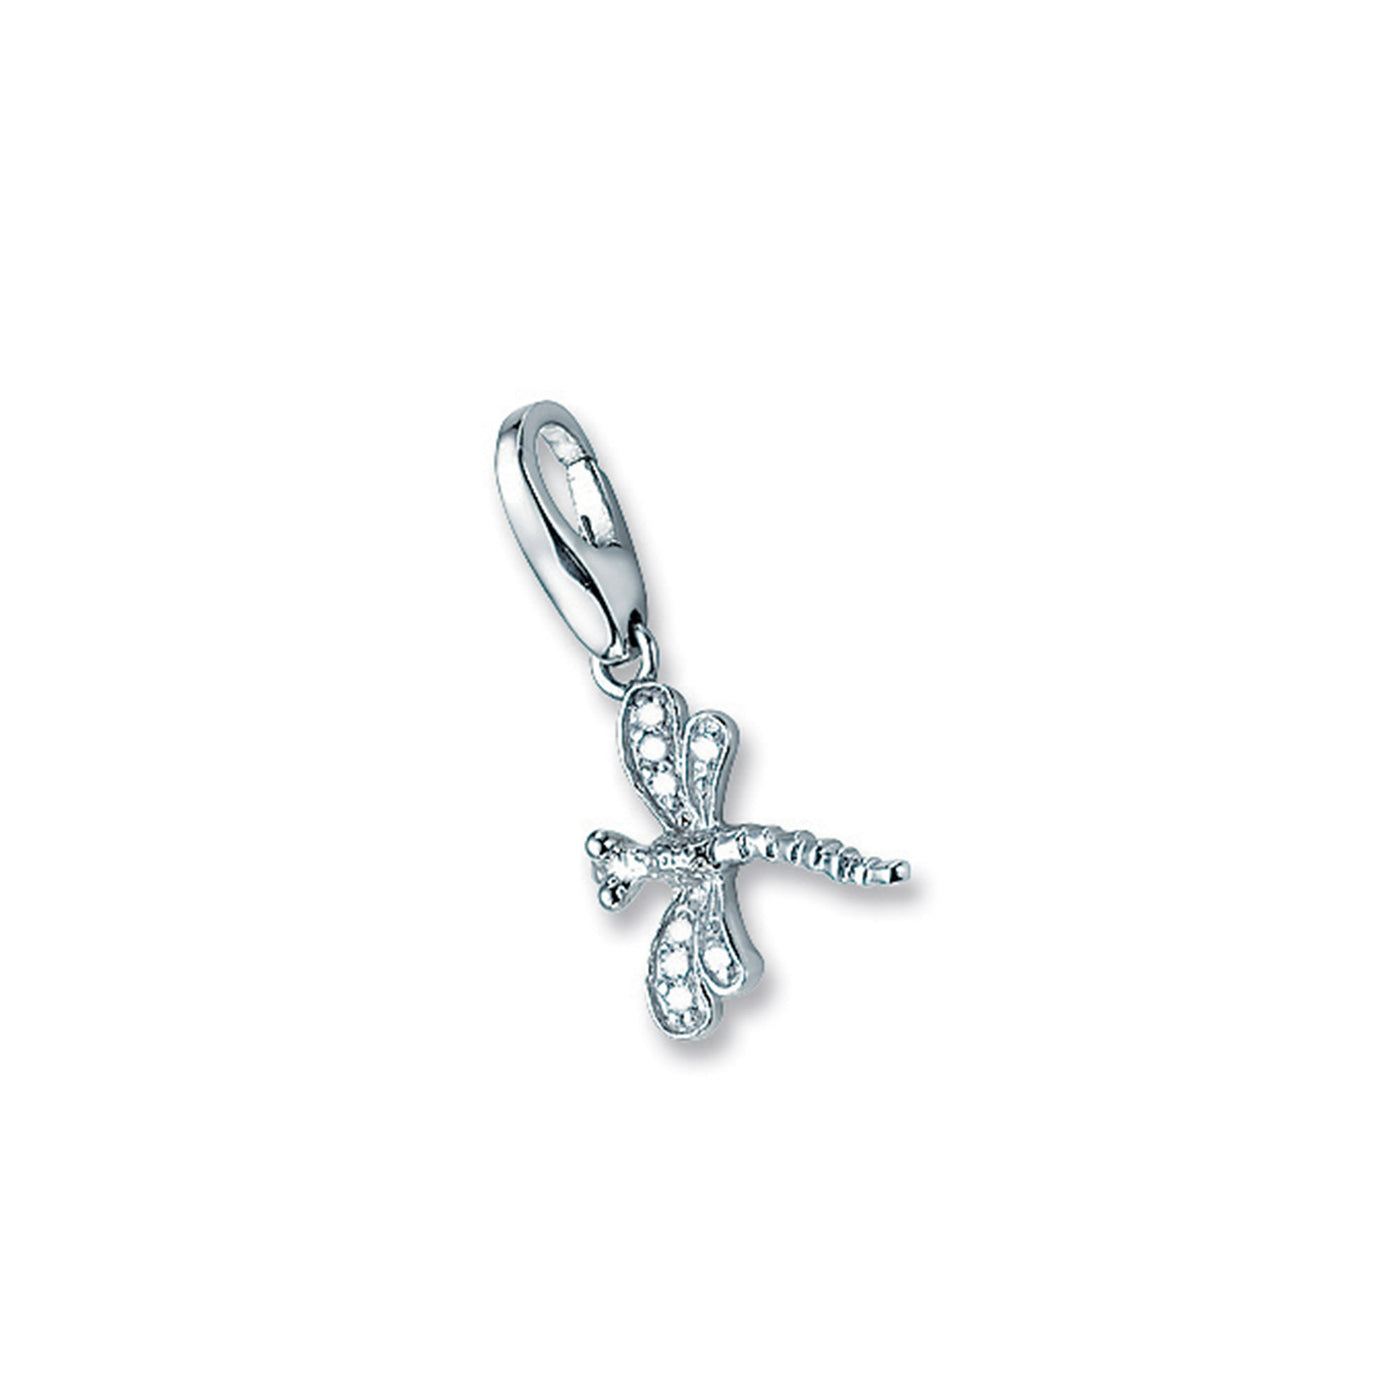 Rebecca Sloane Sterling Silver Dragonfly With Cz Charm